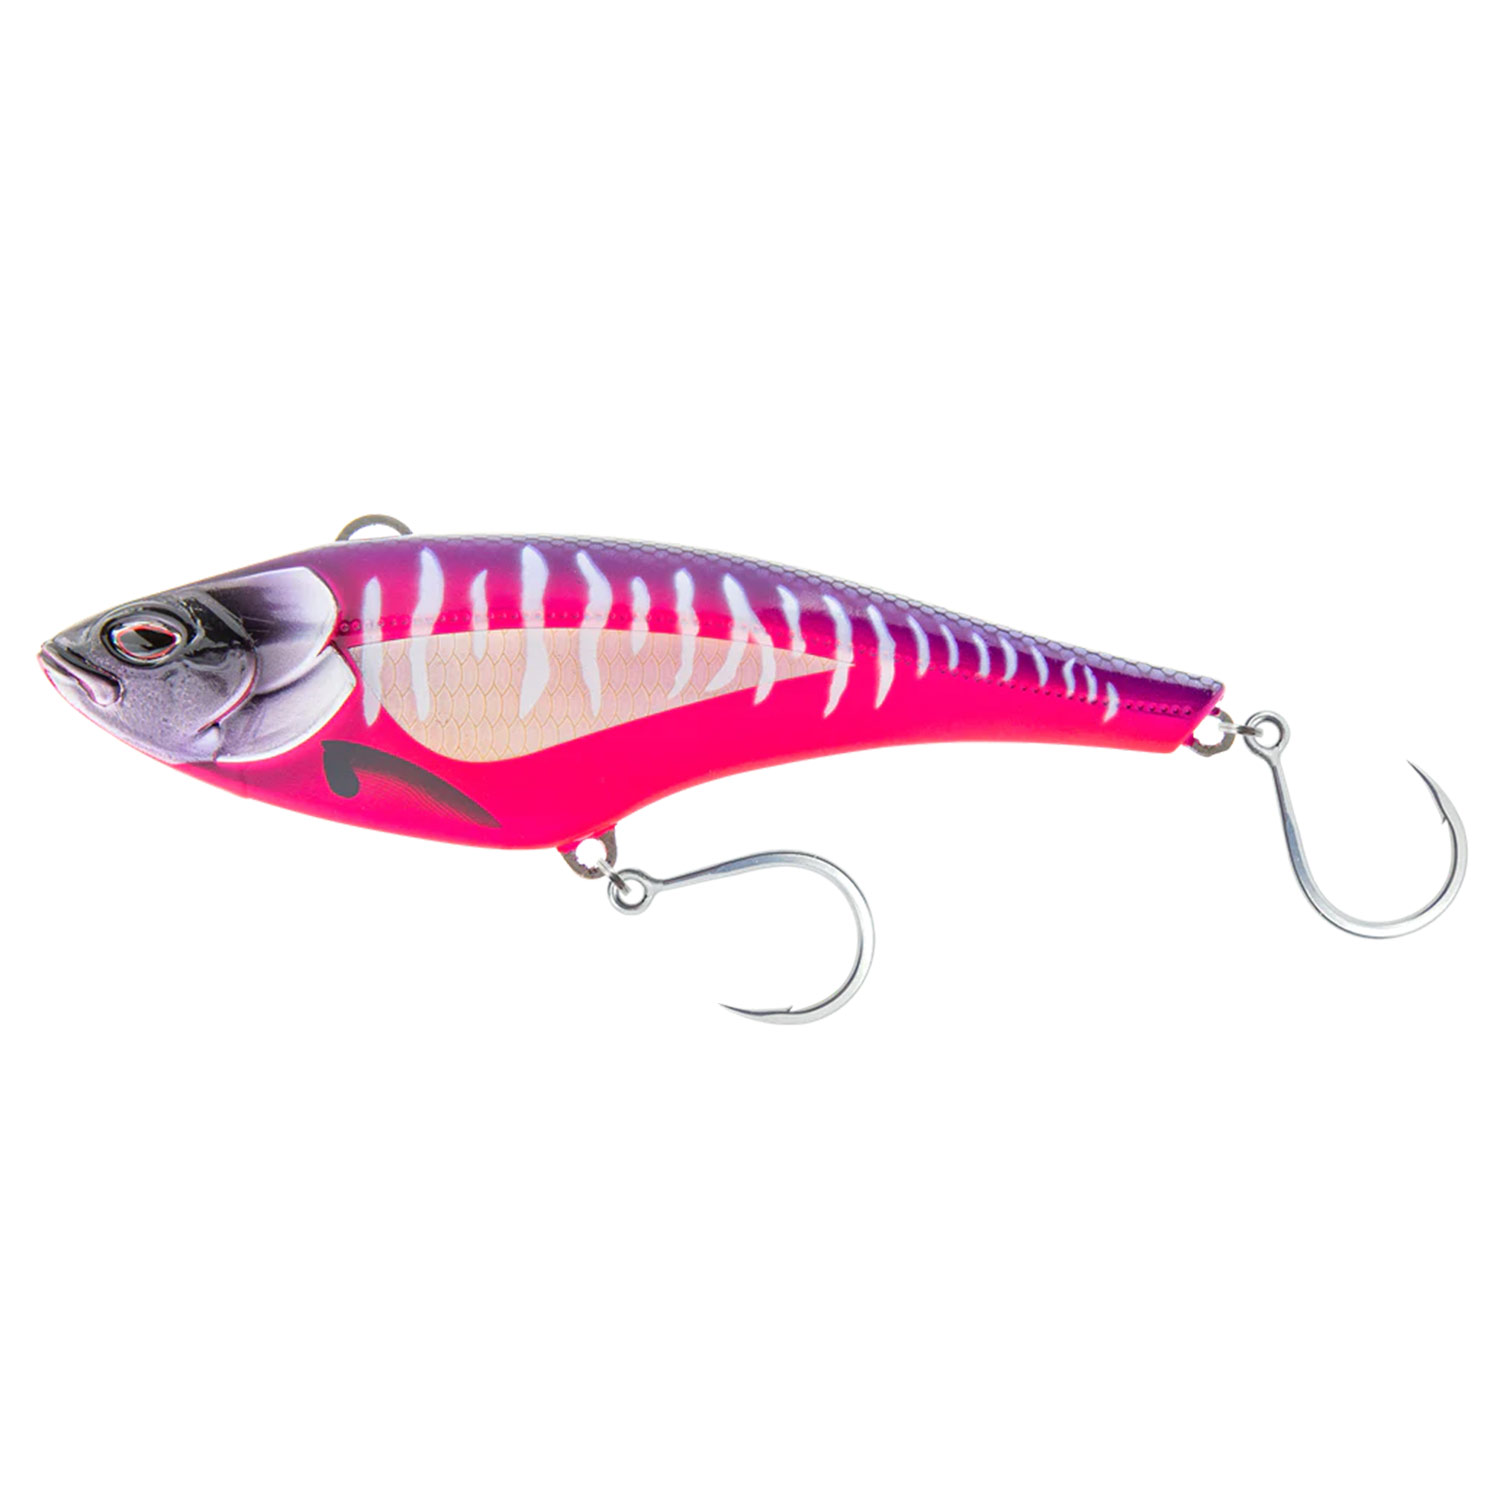 NOMAD DESIGN 6 Madmacs 160 Sinking High Speed Trolling Lure, 6